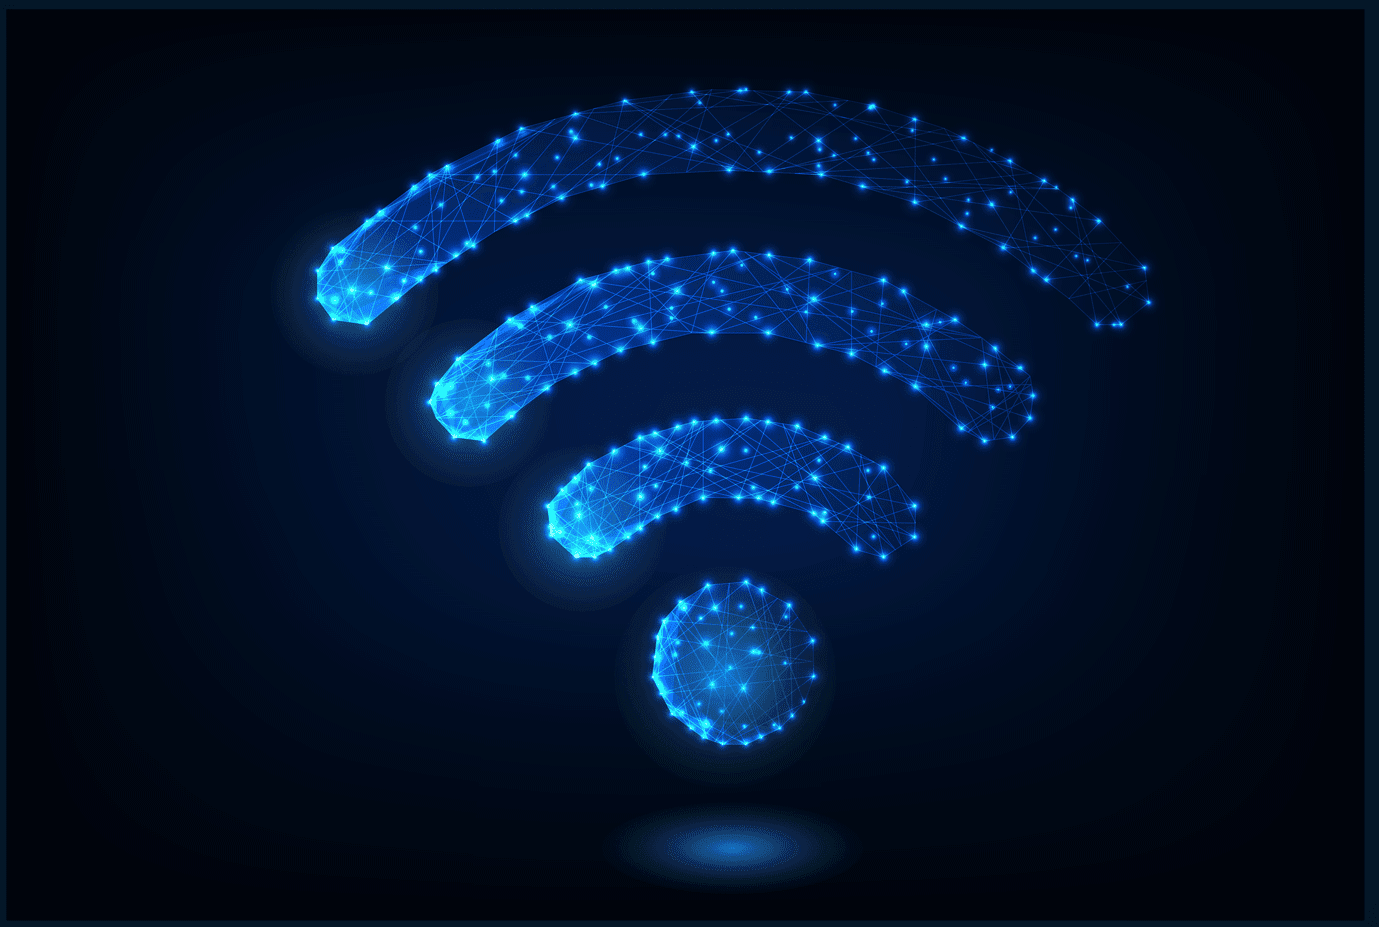 Wi-Fi password hack: How to hack into WPA Wi-Fi and WPA2